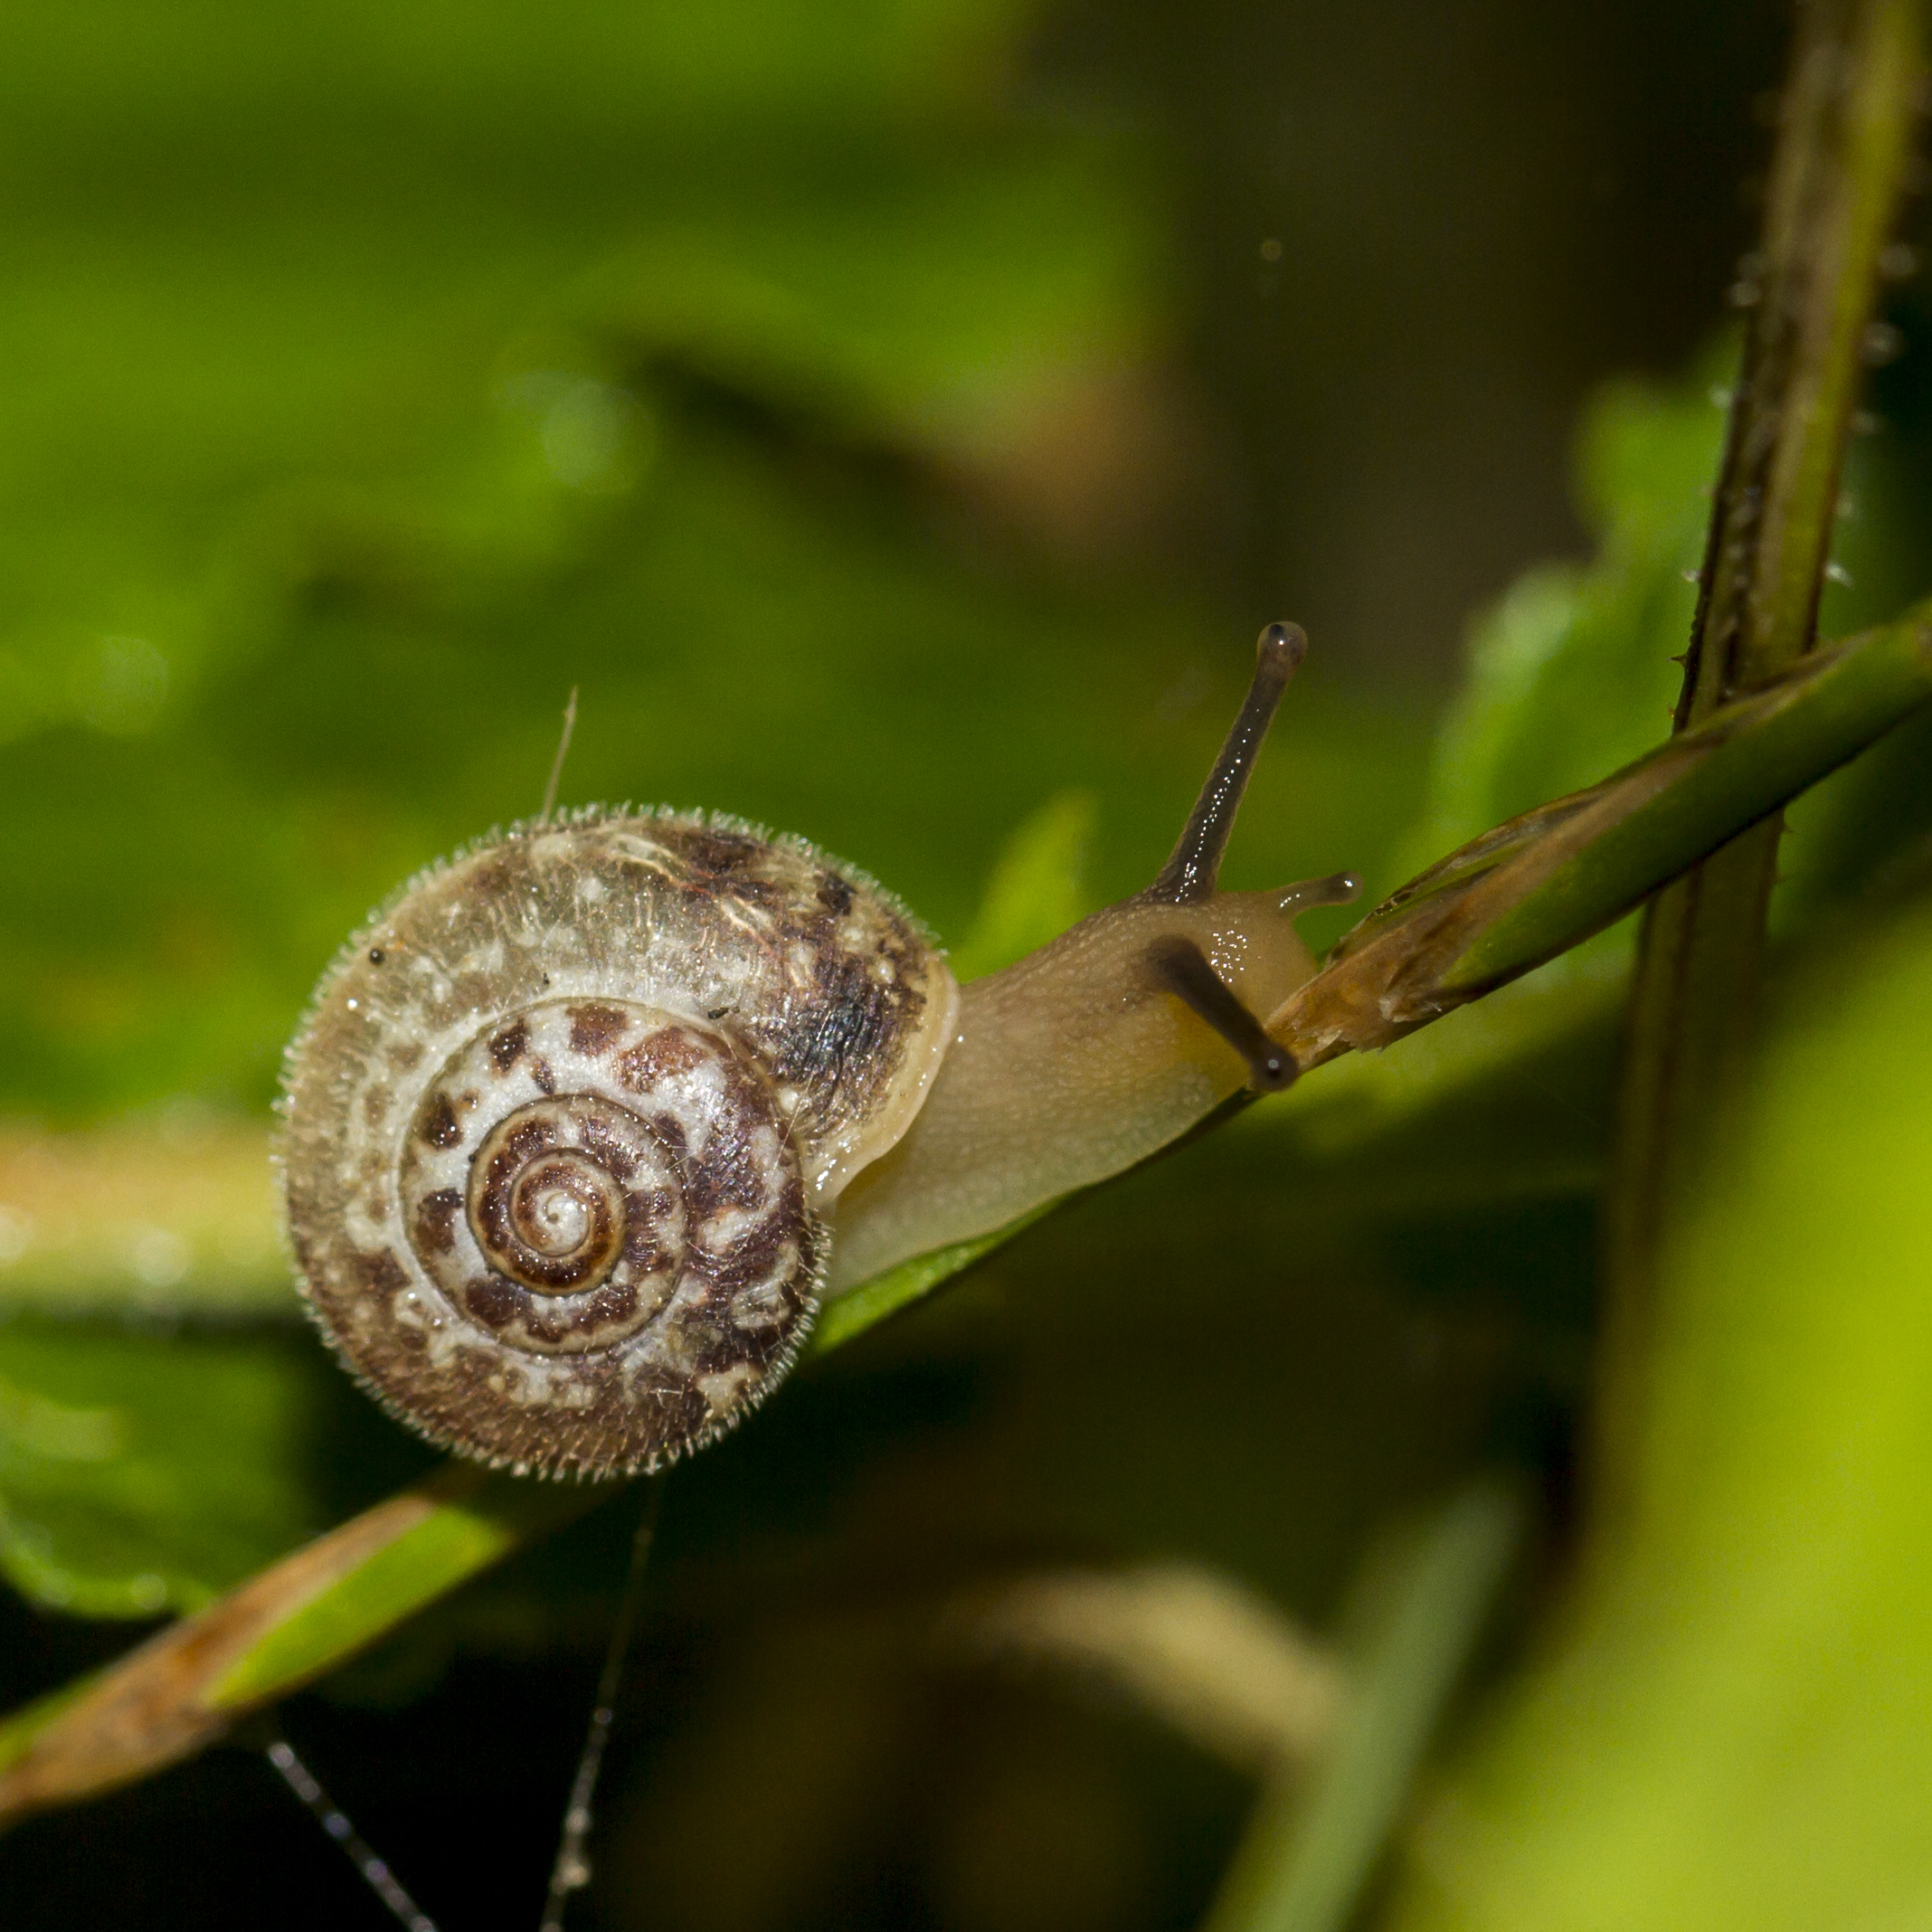 Trochulus hispidus - Hairy Snail climbing up a branch.